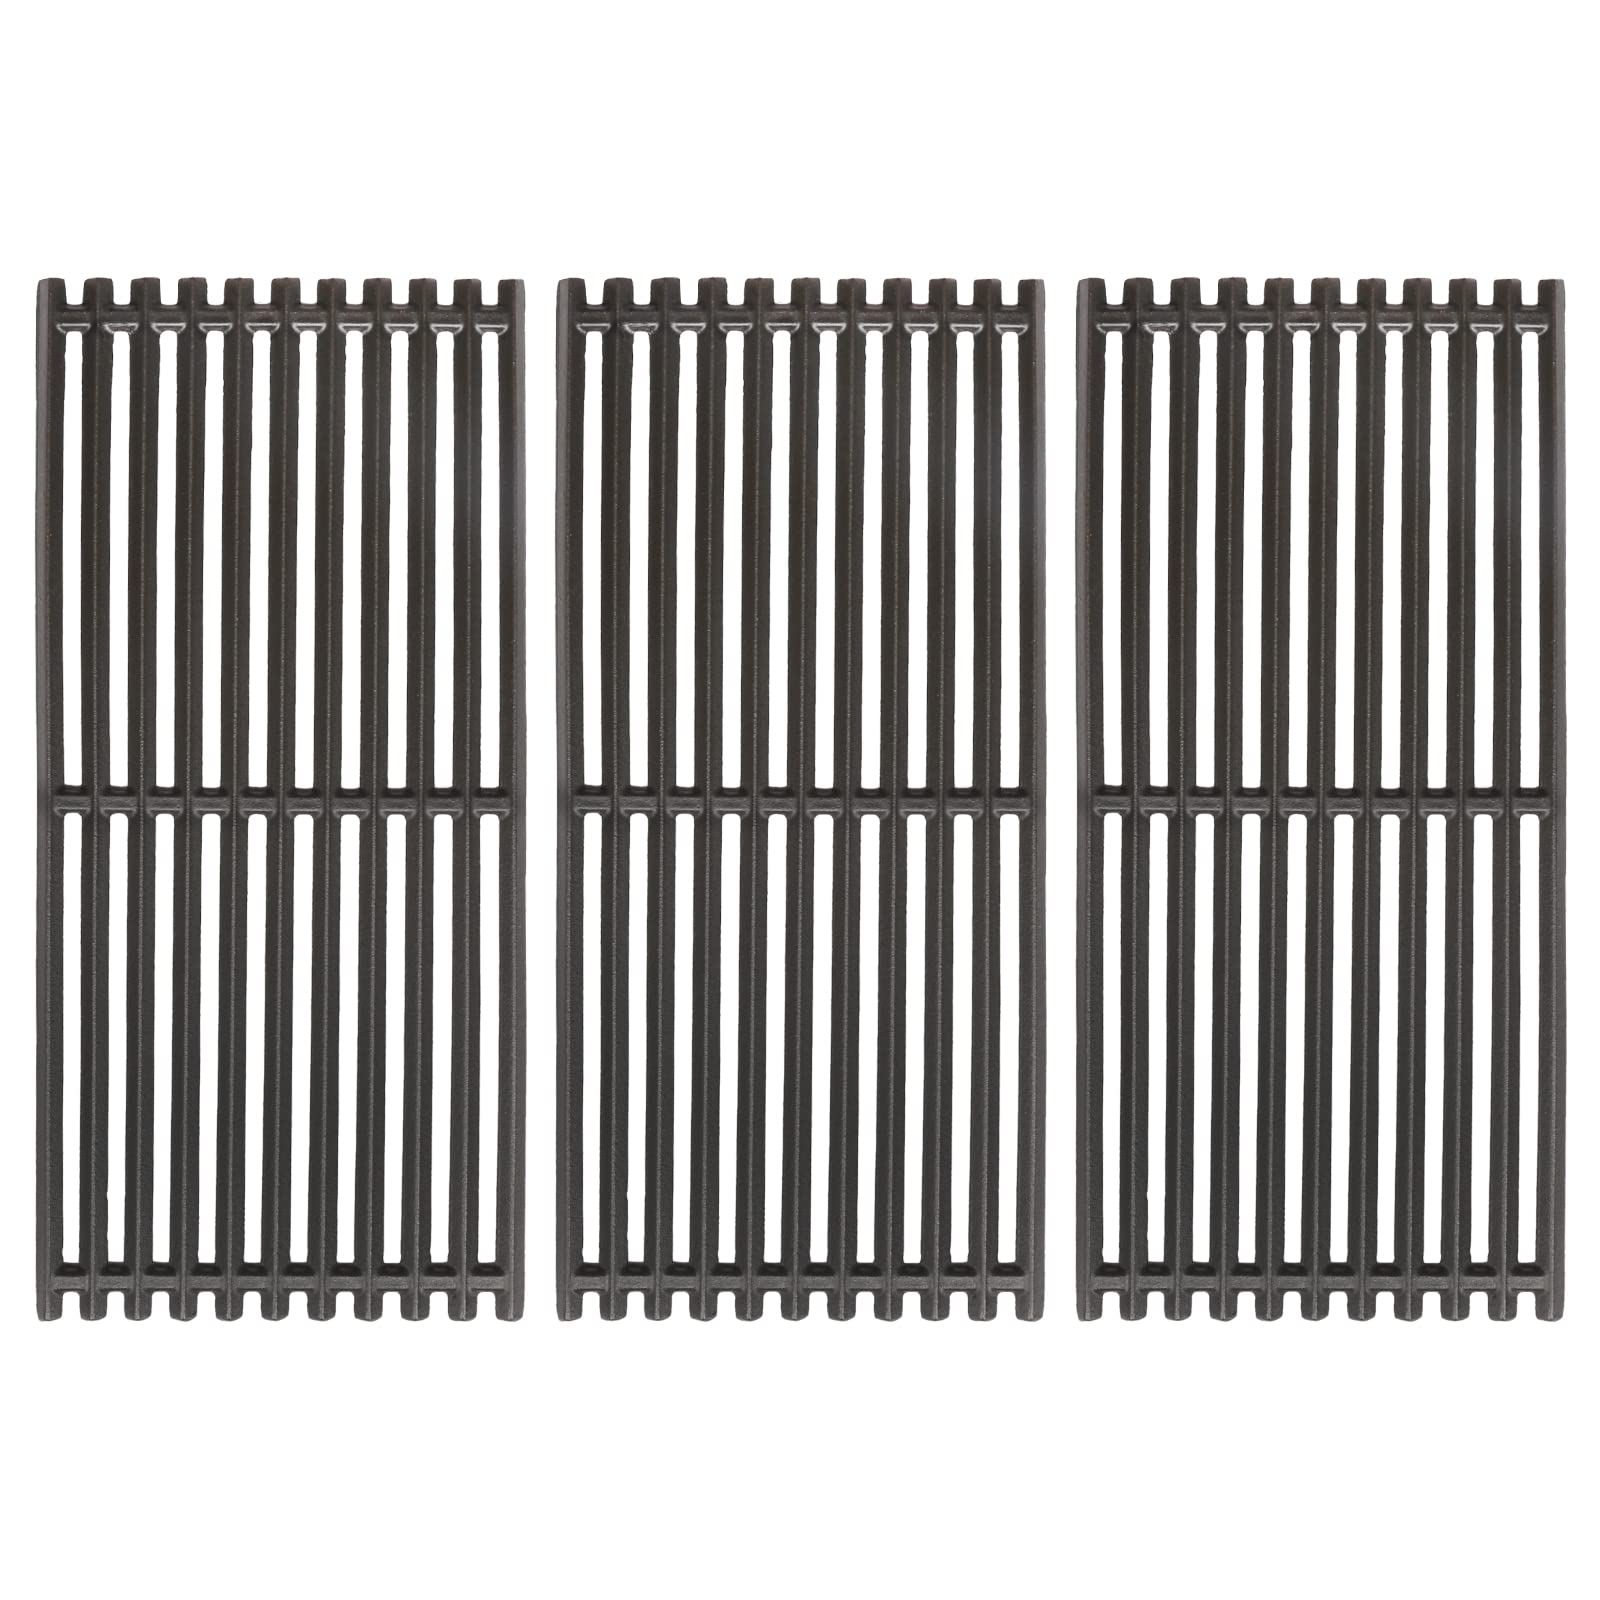 Uniflasy 17 Cast Iron Cooking Grates For Charbroil Commercial Infrared 463355220 463242516 463242515 3-Burner Grill Grates Repla